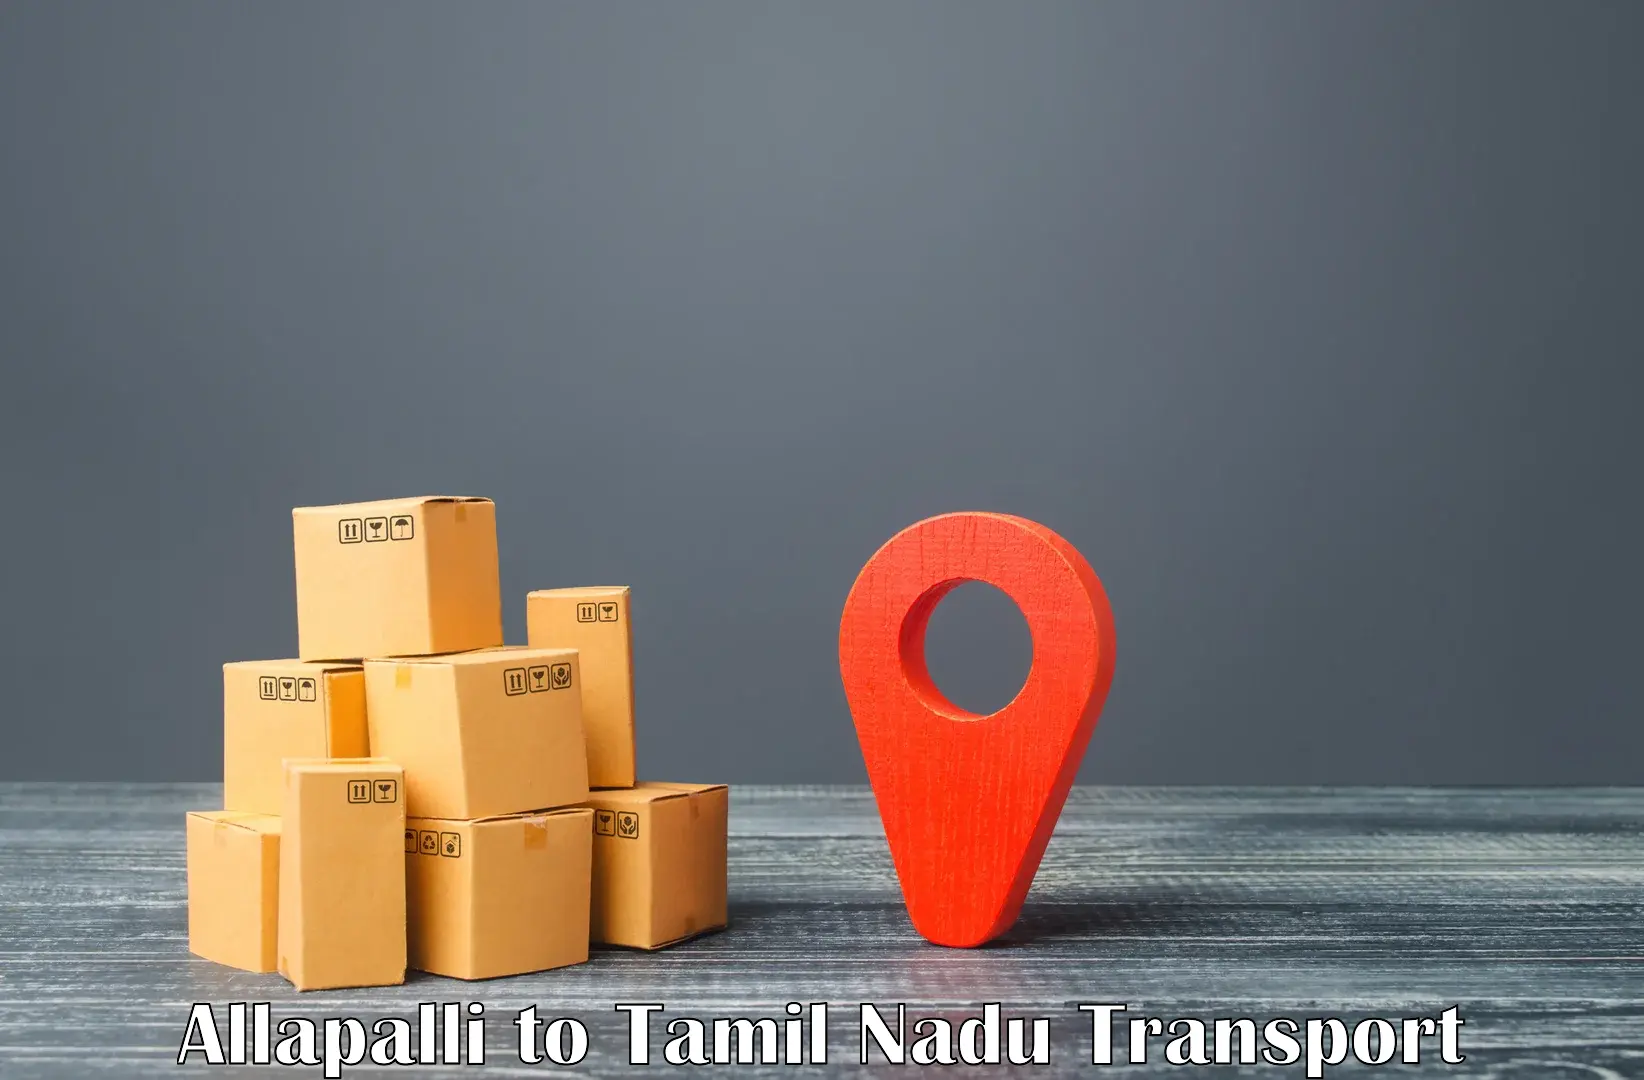 Cycle transportation service Allapalli to Ennore Port Chennai